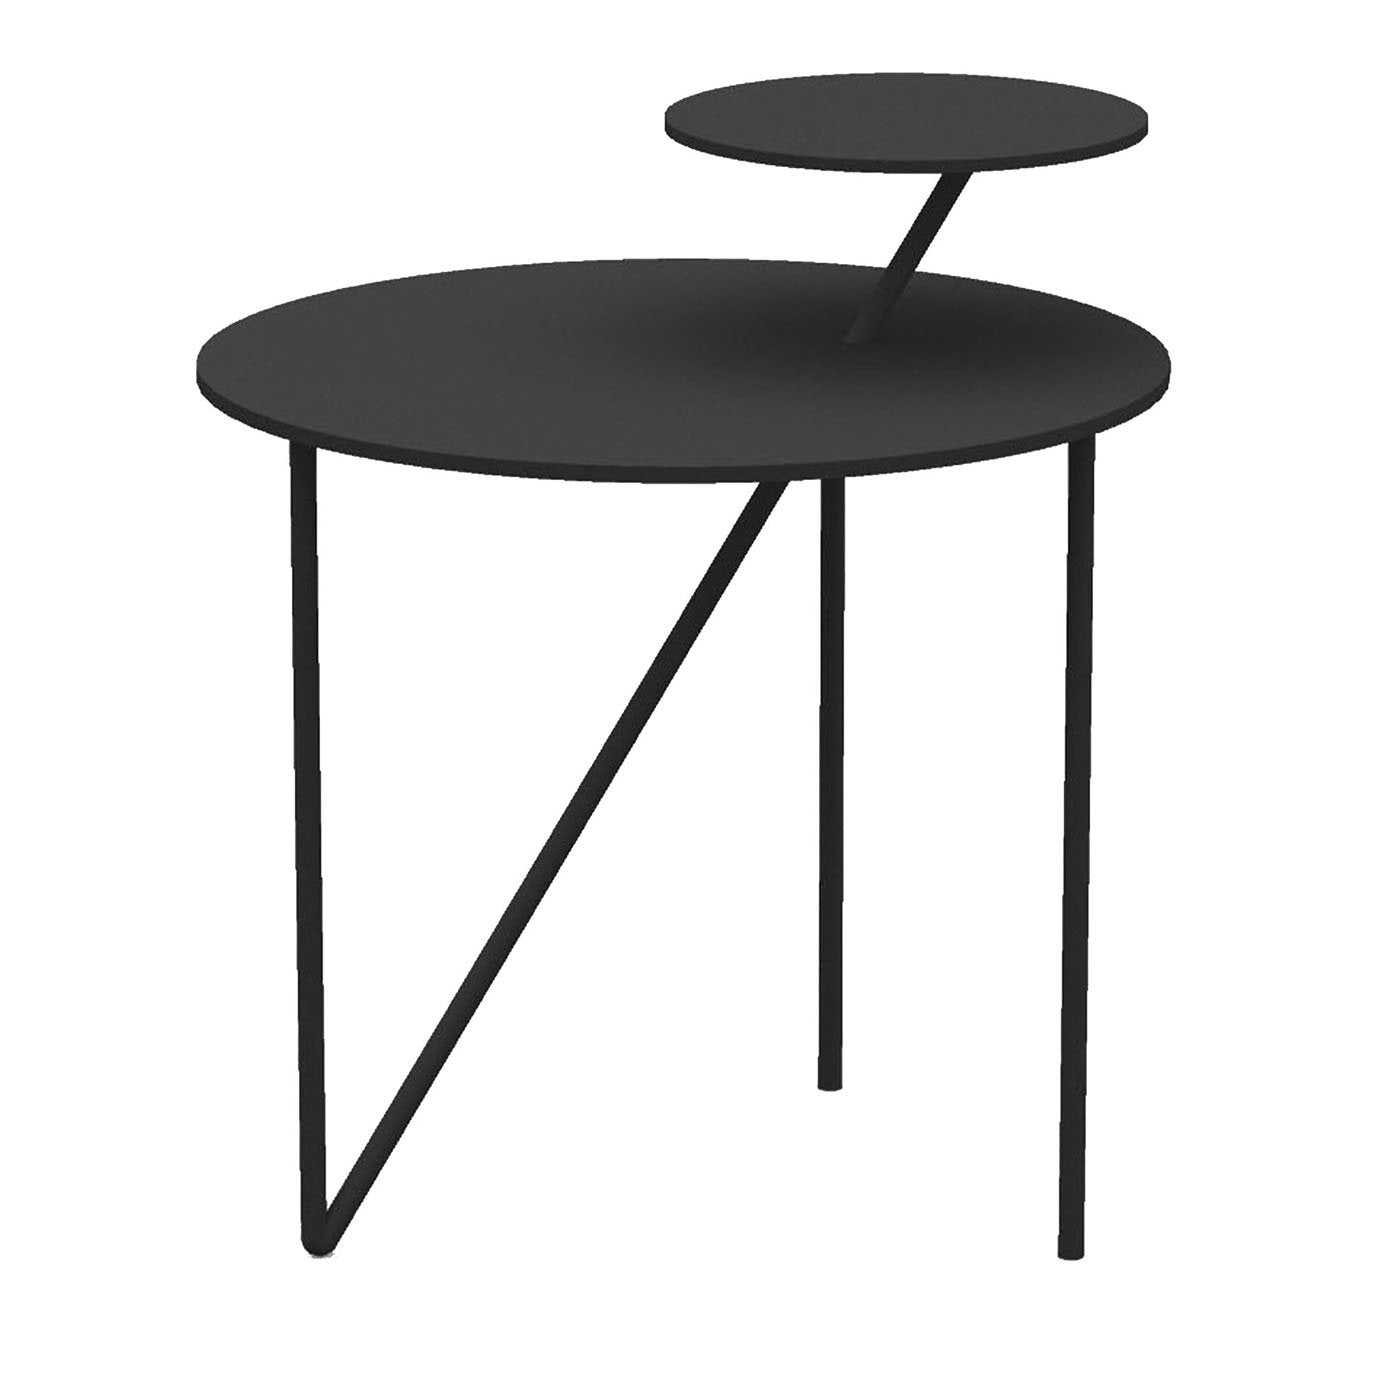 Passante Low Anthracite Coffee Table - Alternative view 1